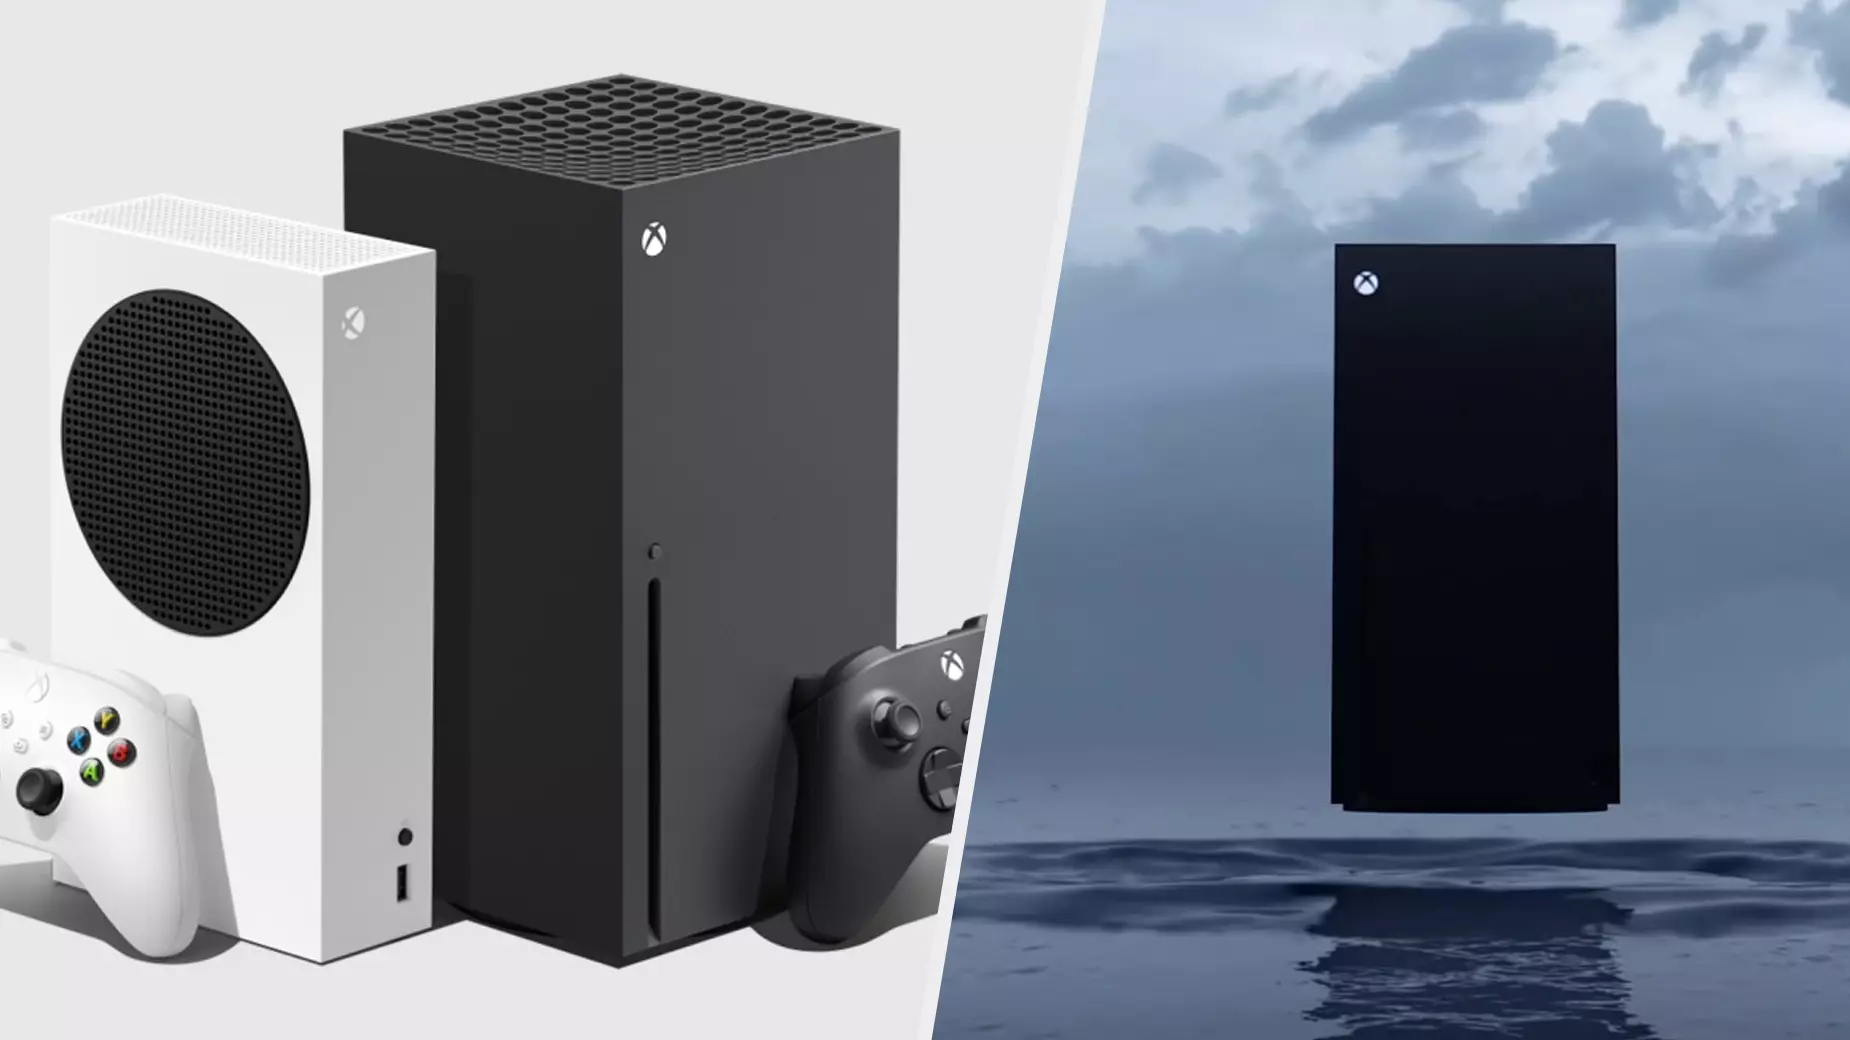 Xbox Series X Pre-Orders May Also Miss Release Day, Warns Retailer